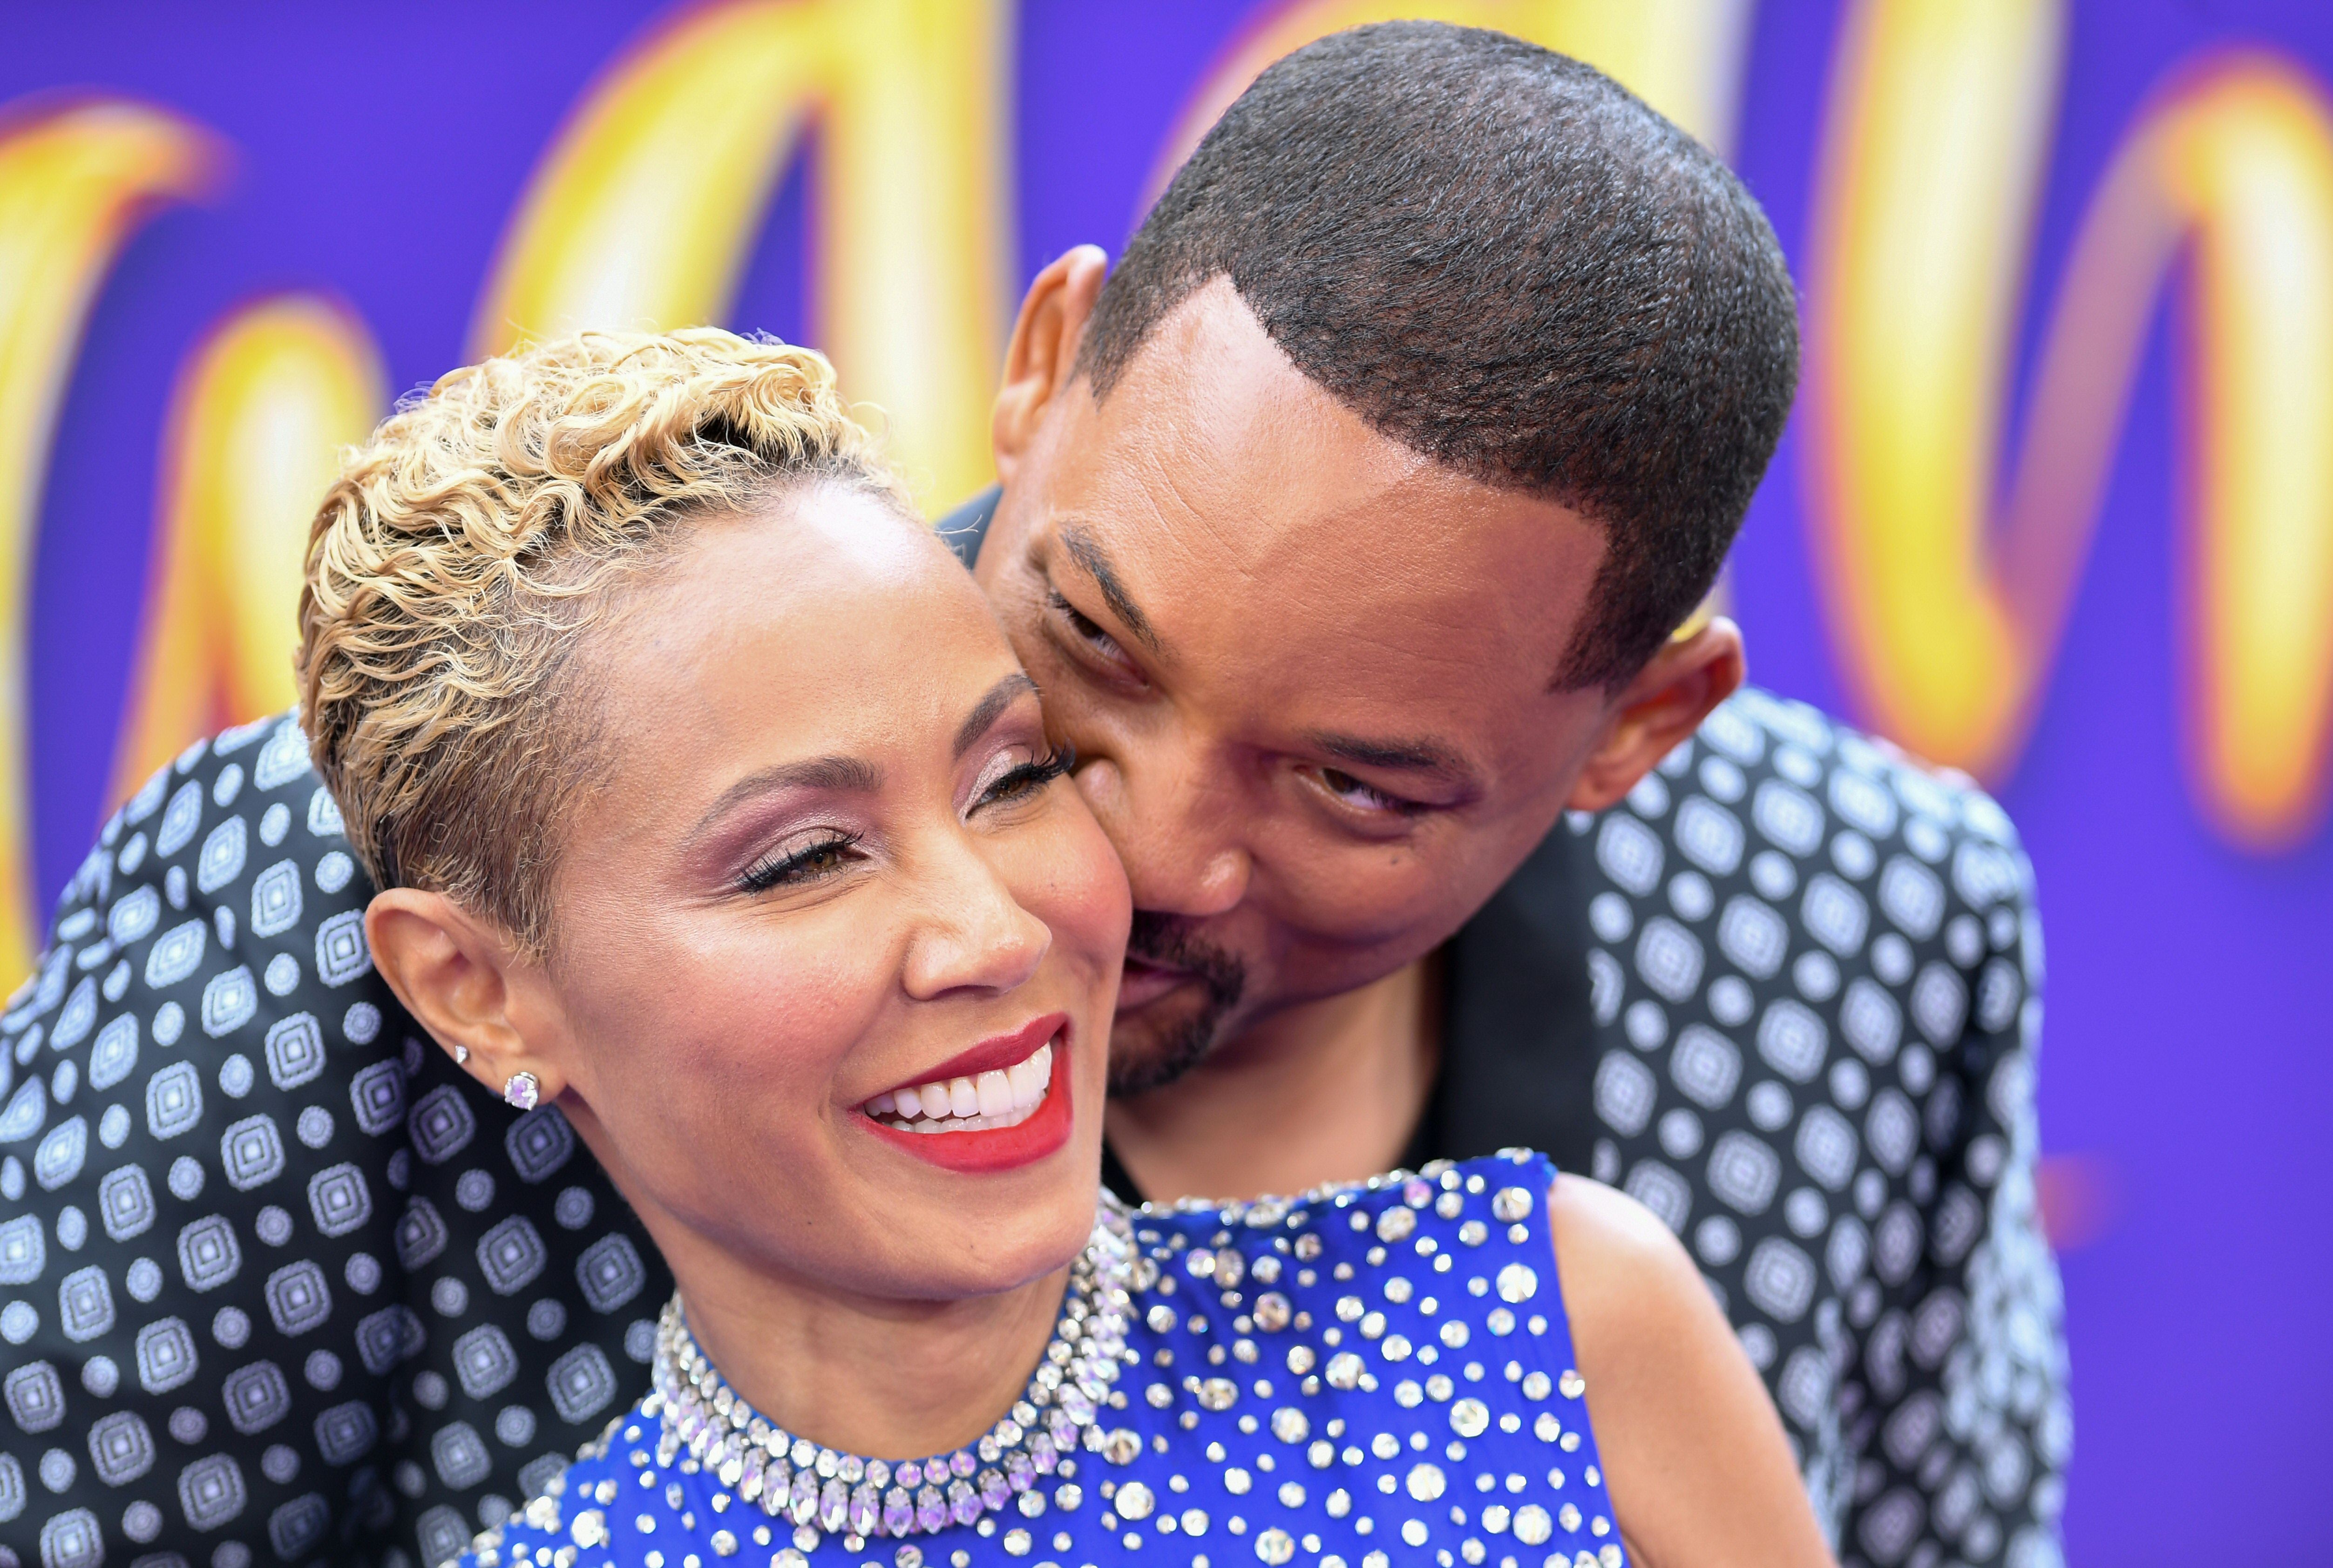 Will Smith and Jada Pinkett Smith during the "Aladdin" premiere in Hollywood, California on May 21, 2019 | Source: Getty Images